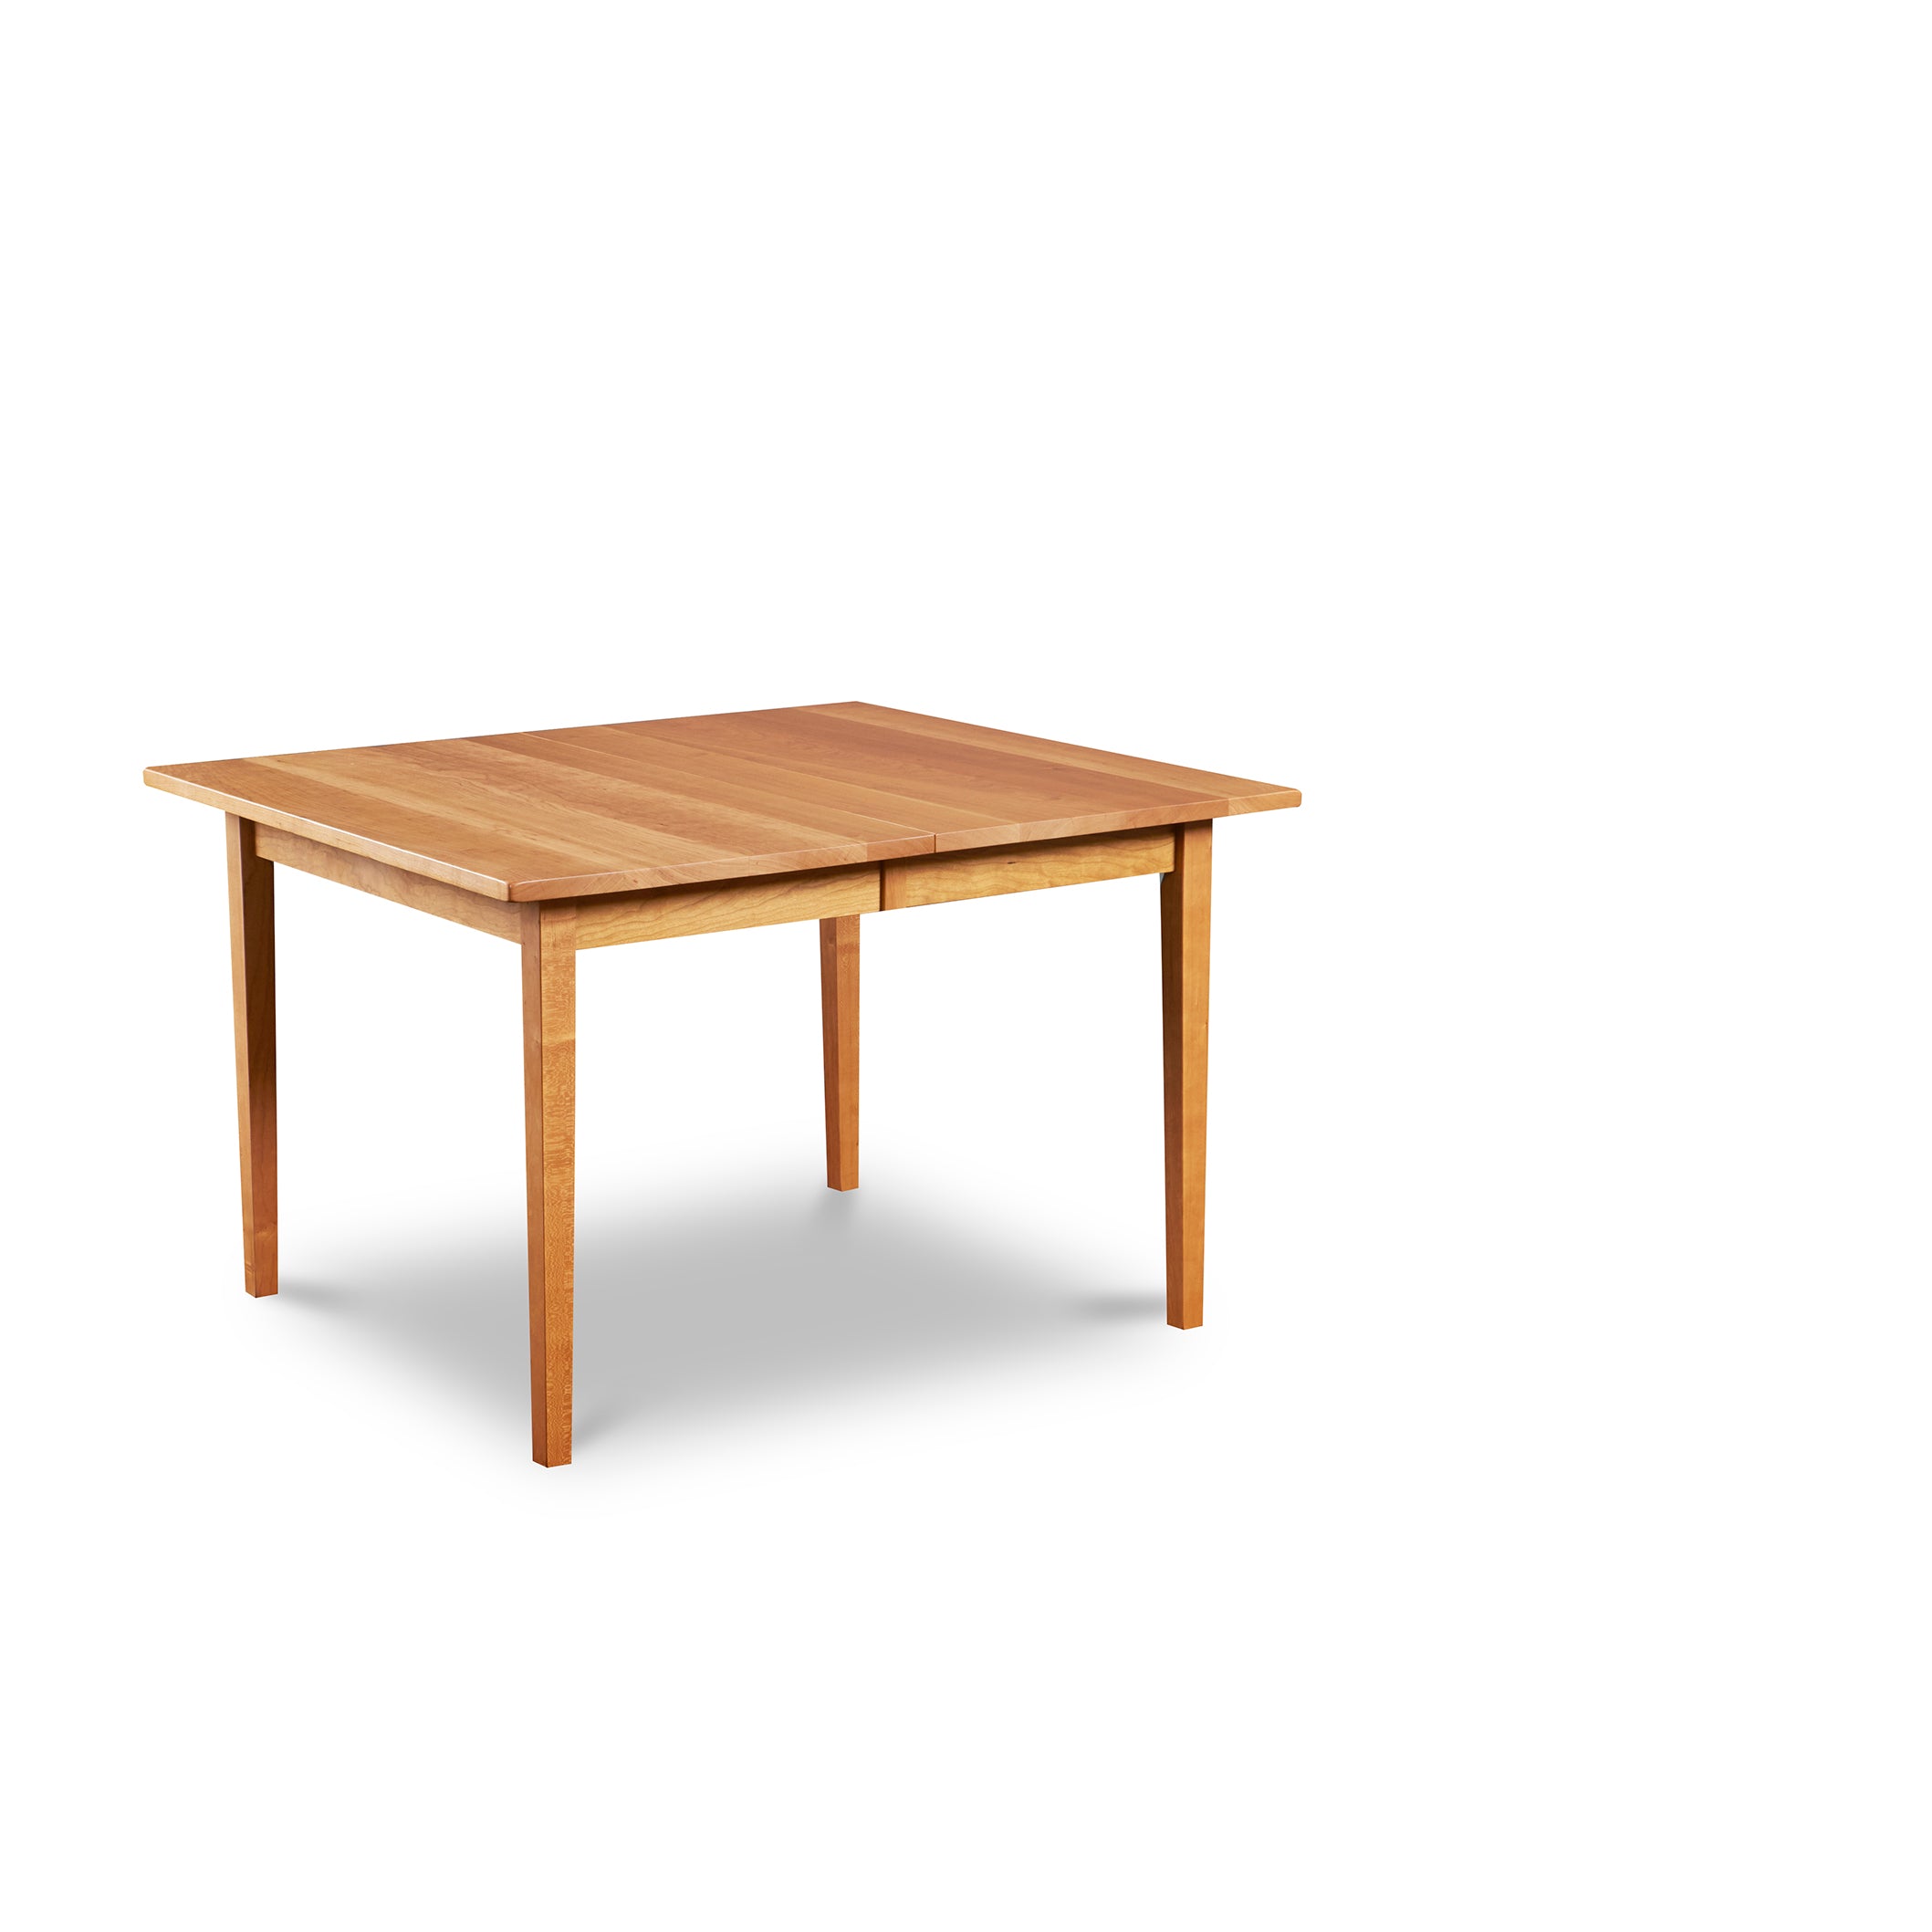 Shaker Oval Extension Dining Table